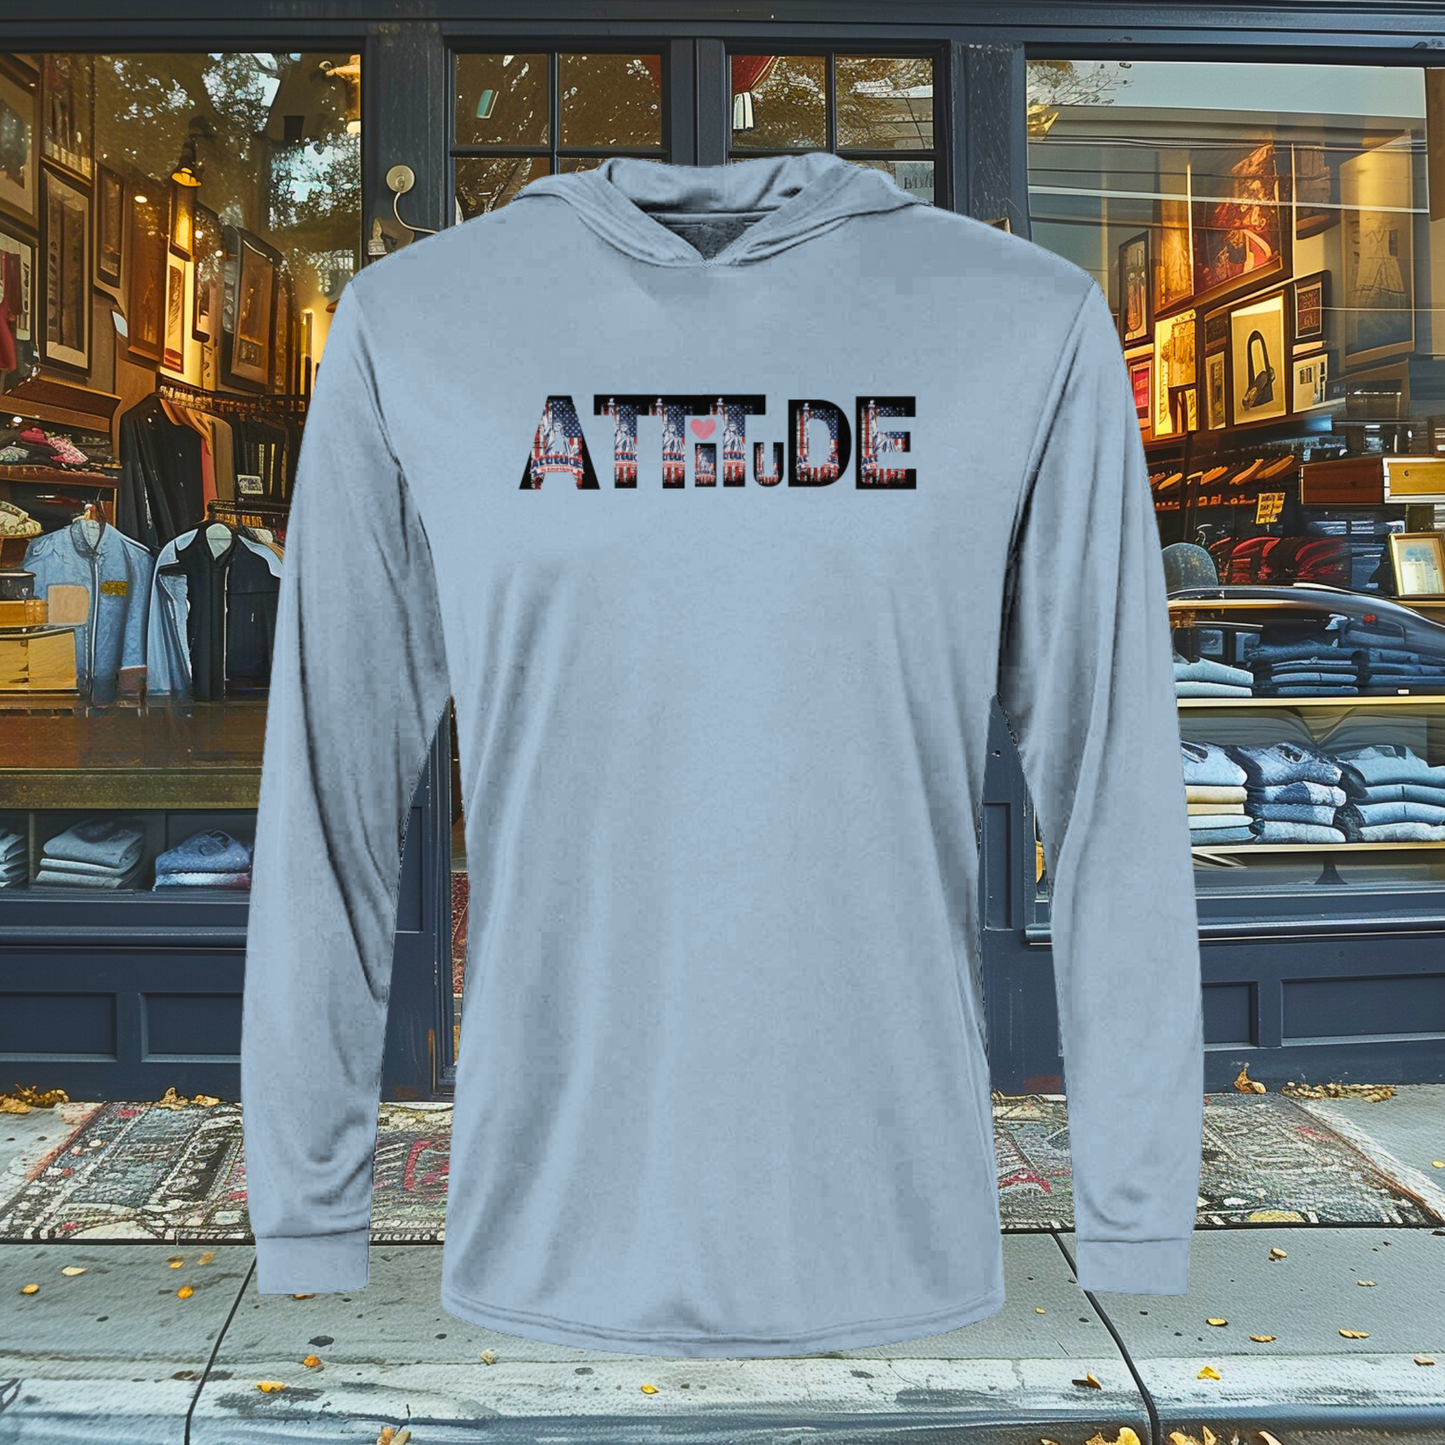 Bahama Hooded LS Tee USA :Attitude with a arm logo "smile more never give upCrafted from 100% microfiber performance polyester, it seamlessly blends comfort and style. From wrinkle-resistant finesse to UPF 50 protection